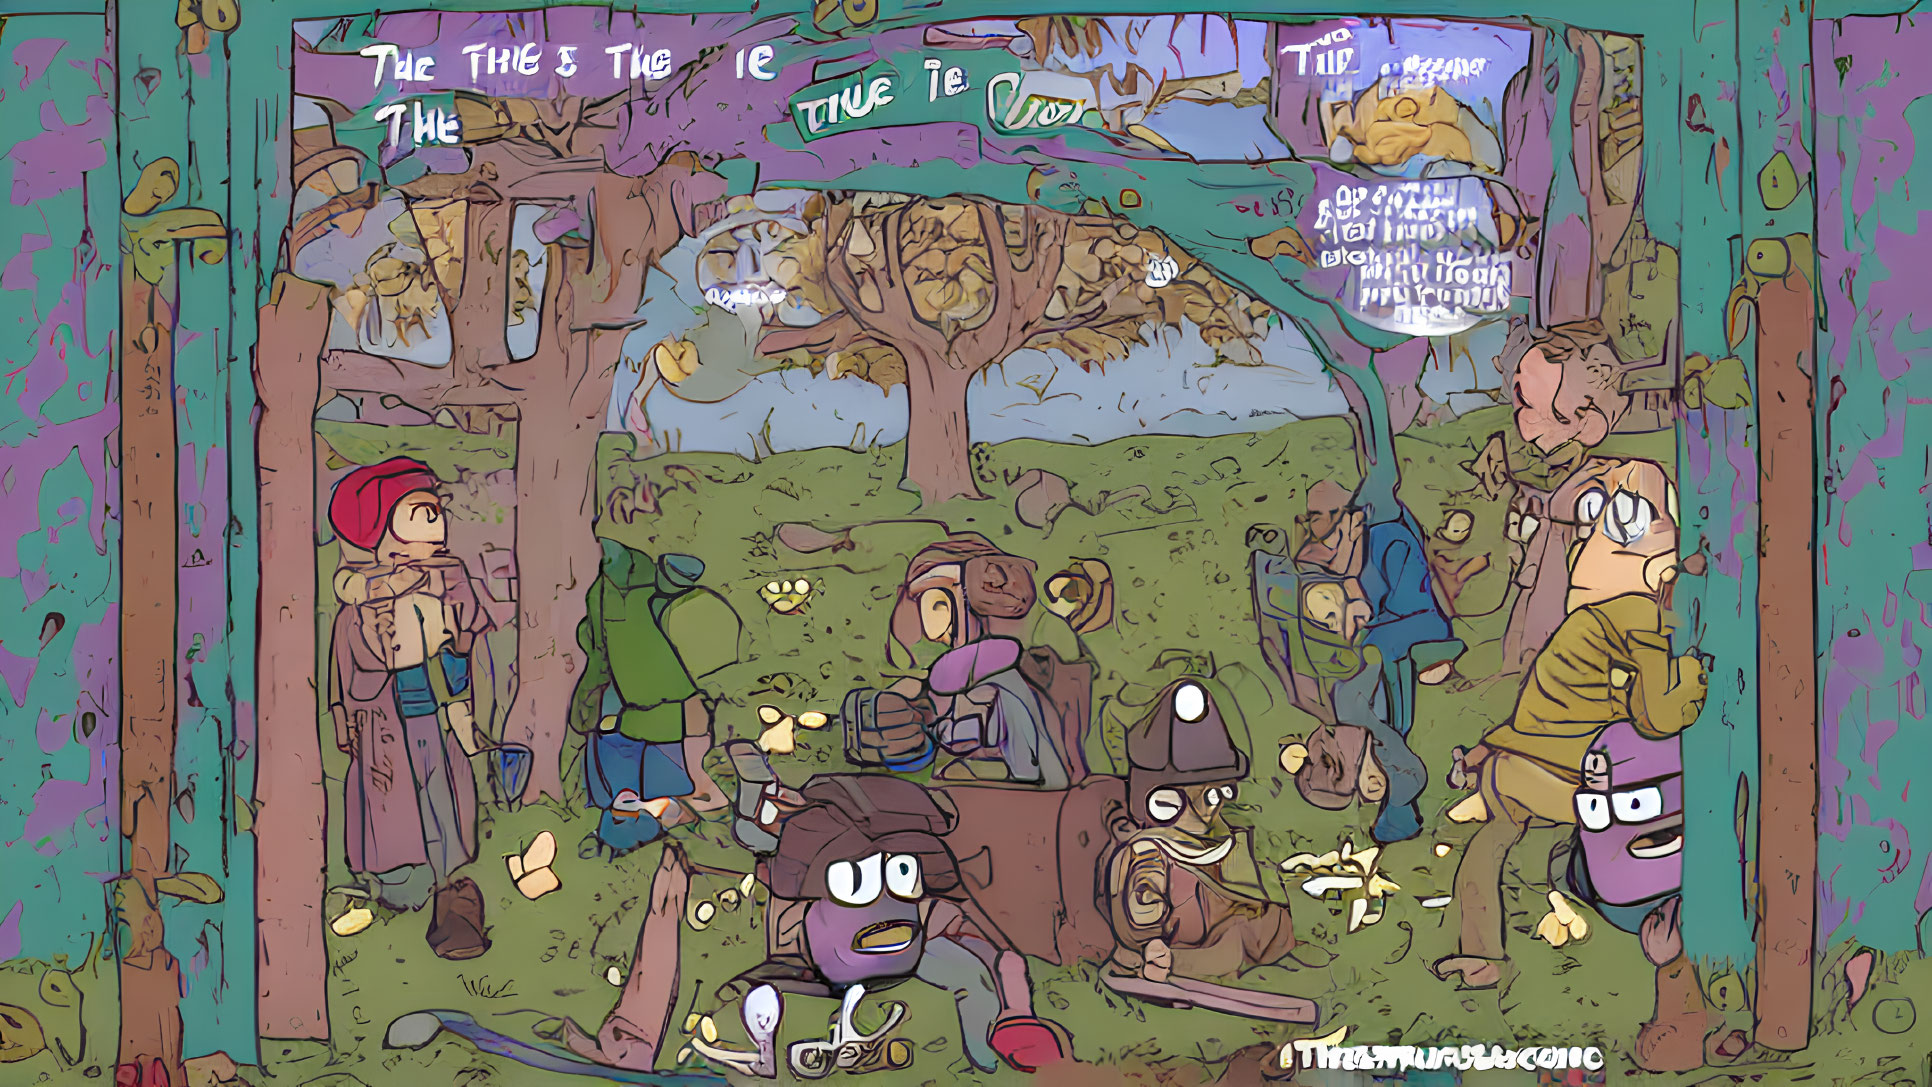 Colorful Cartoon Illustration of Characters in Woodland Setting